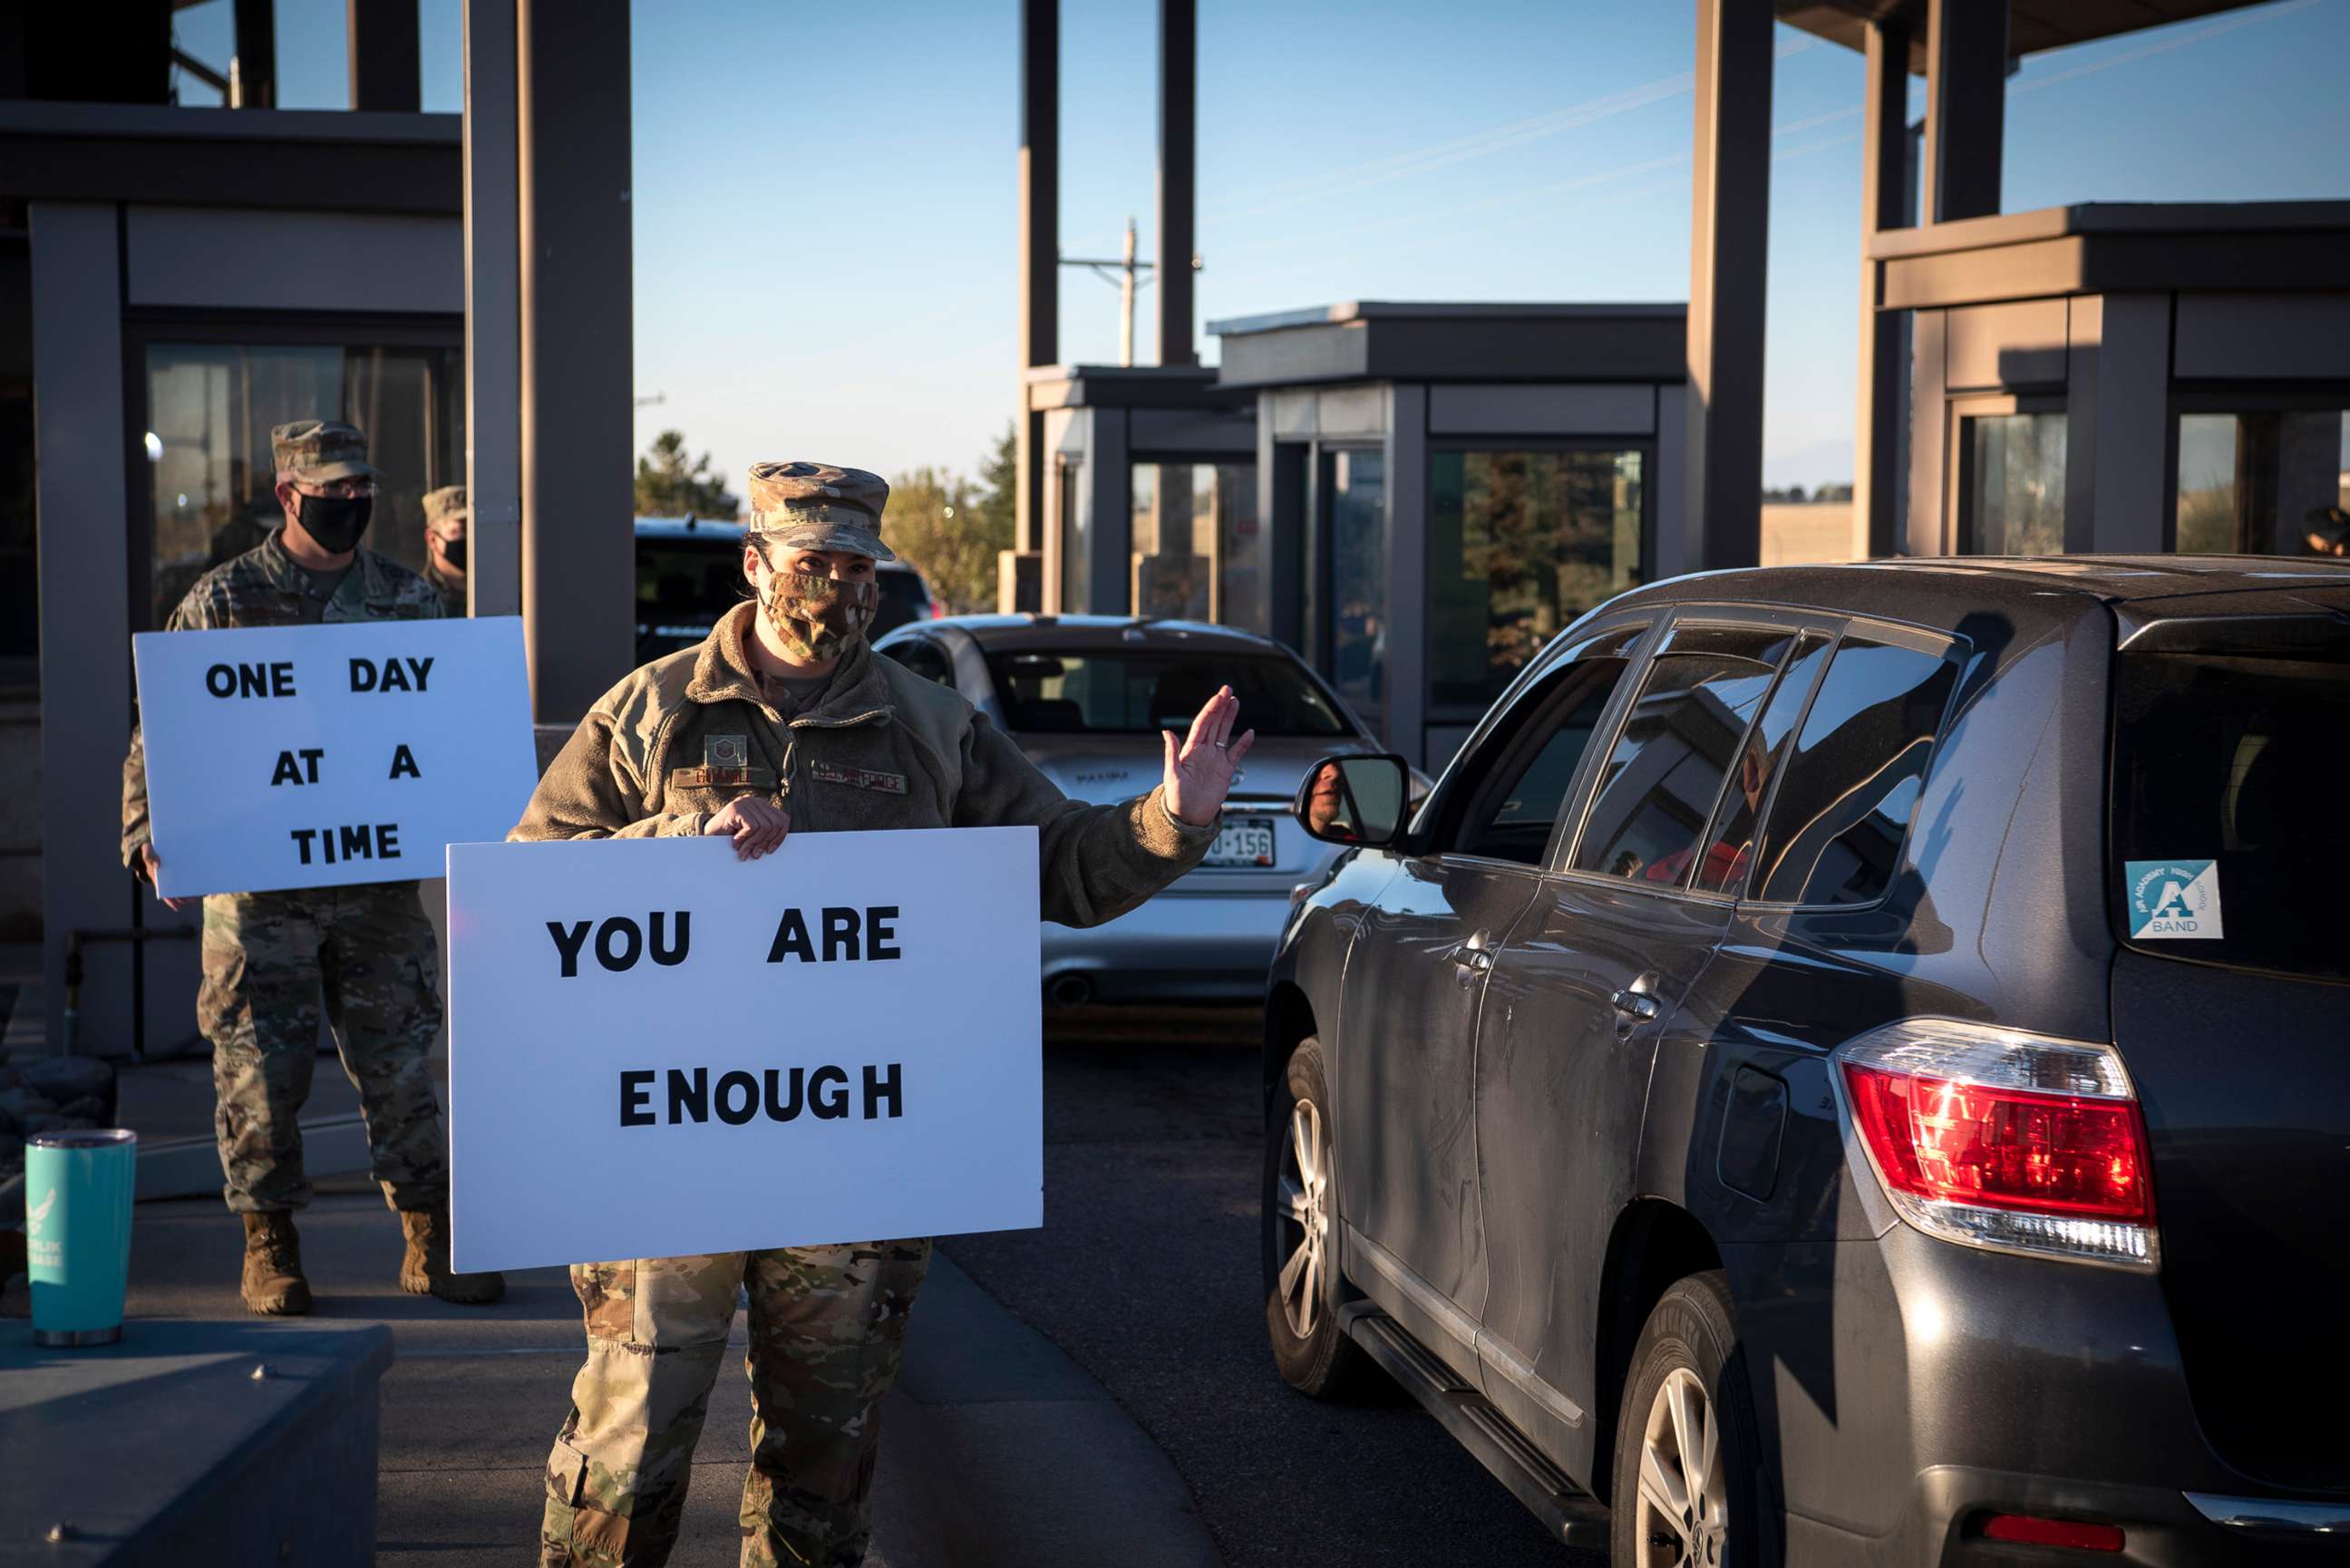 PHOTO: Master Sgt. Erin Kirby-Guanill, greets members at the Schriever North gate, Sept. 29, 2020, at Schriever Air Force Base, Colorado to spread a positive message to members who entered the installation.